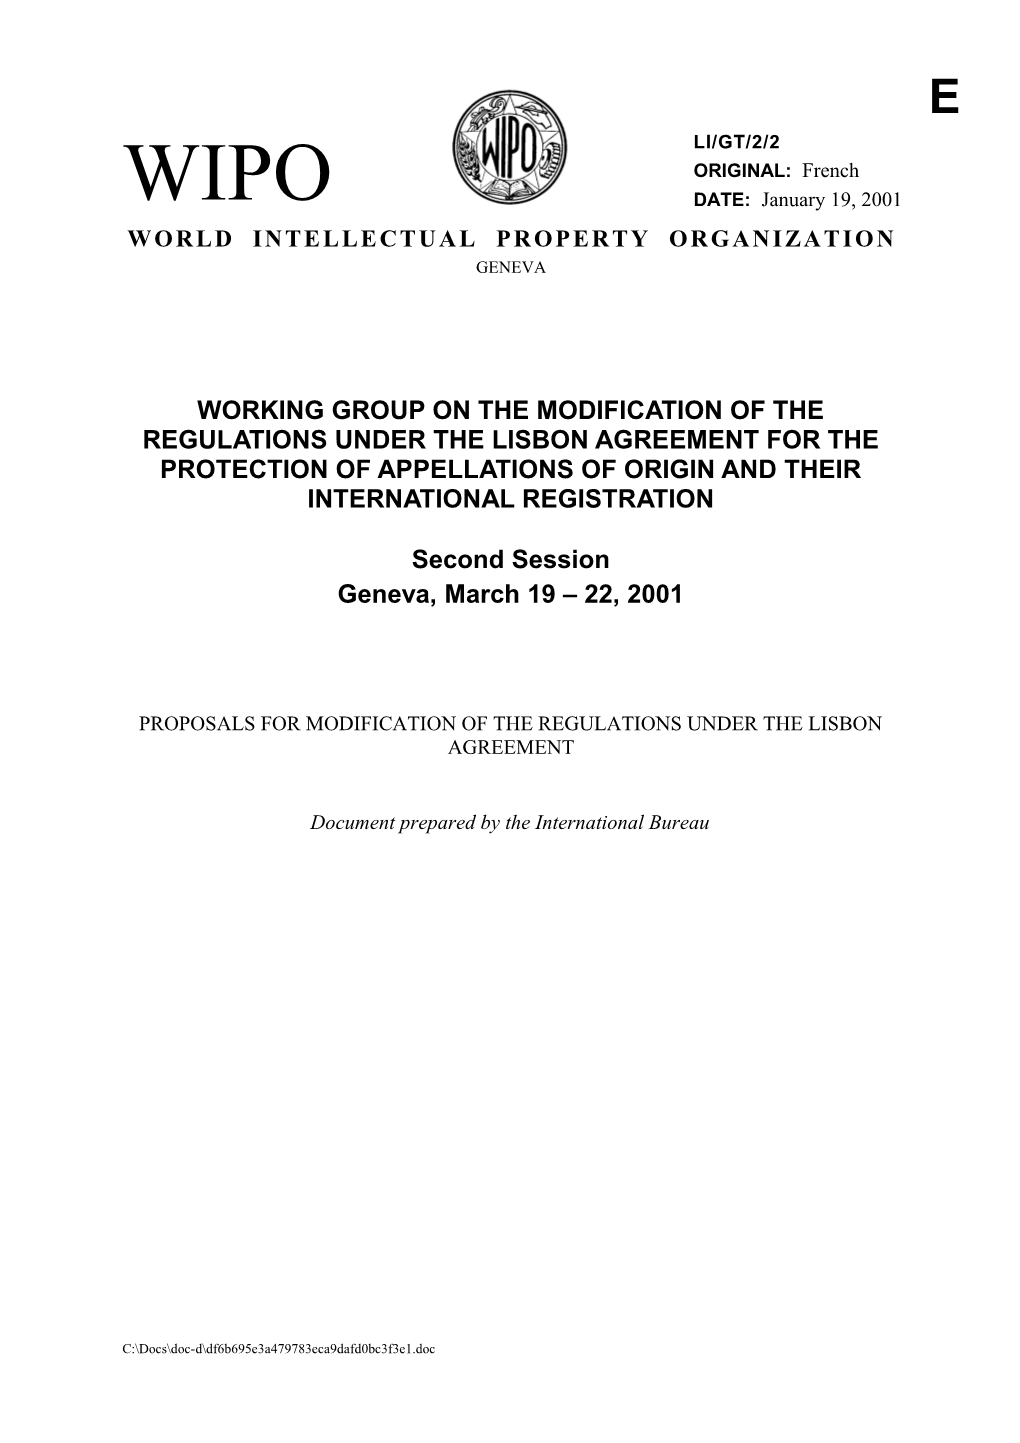 LI/GT/2/2: Proposals for Modification of the Regulations Under the Lisbon Agreement